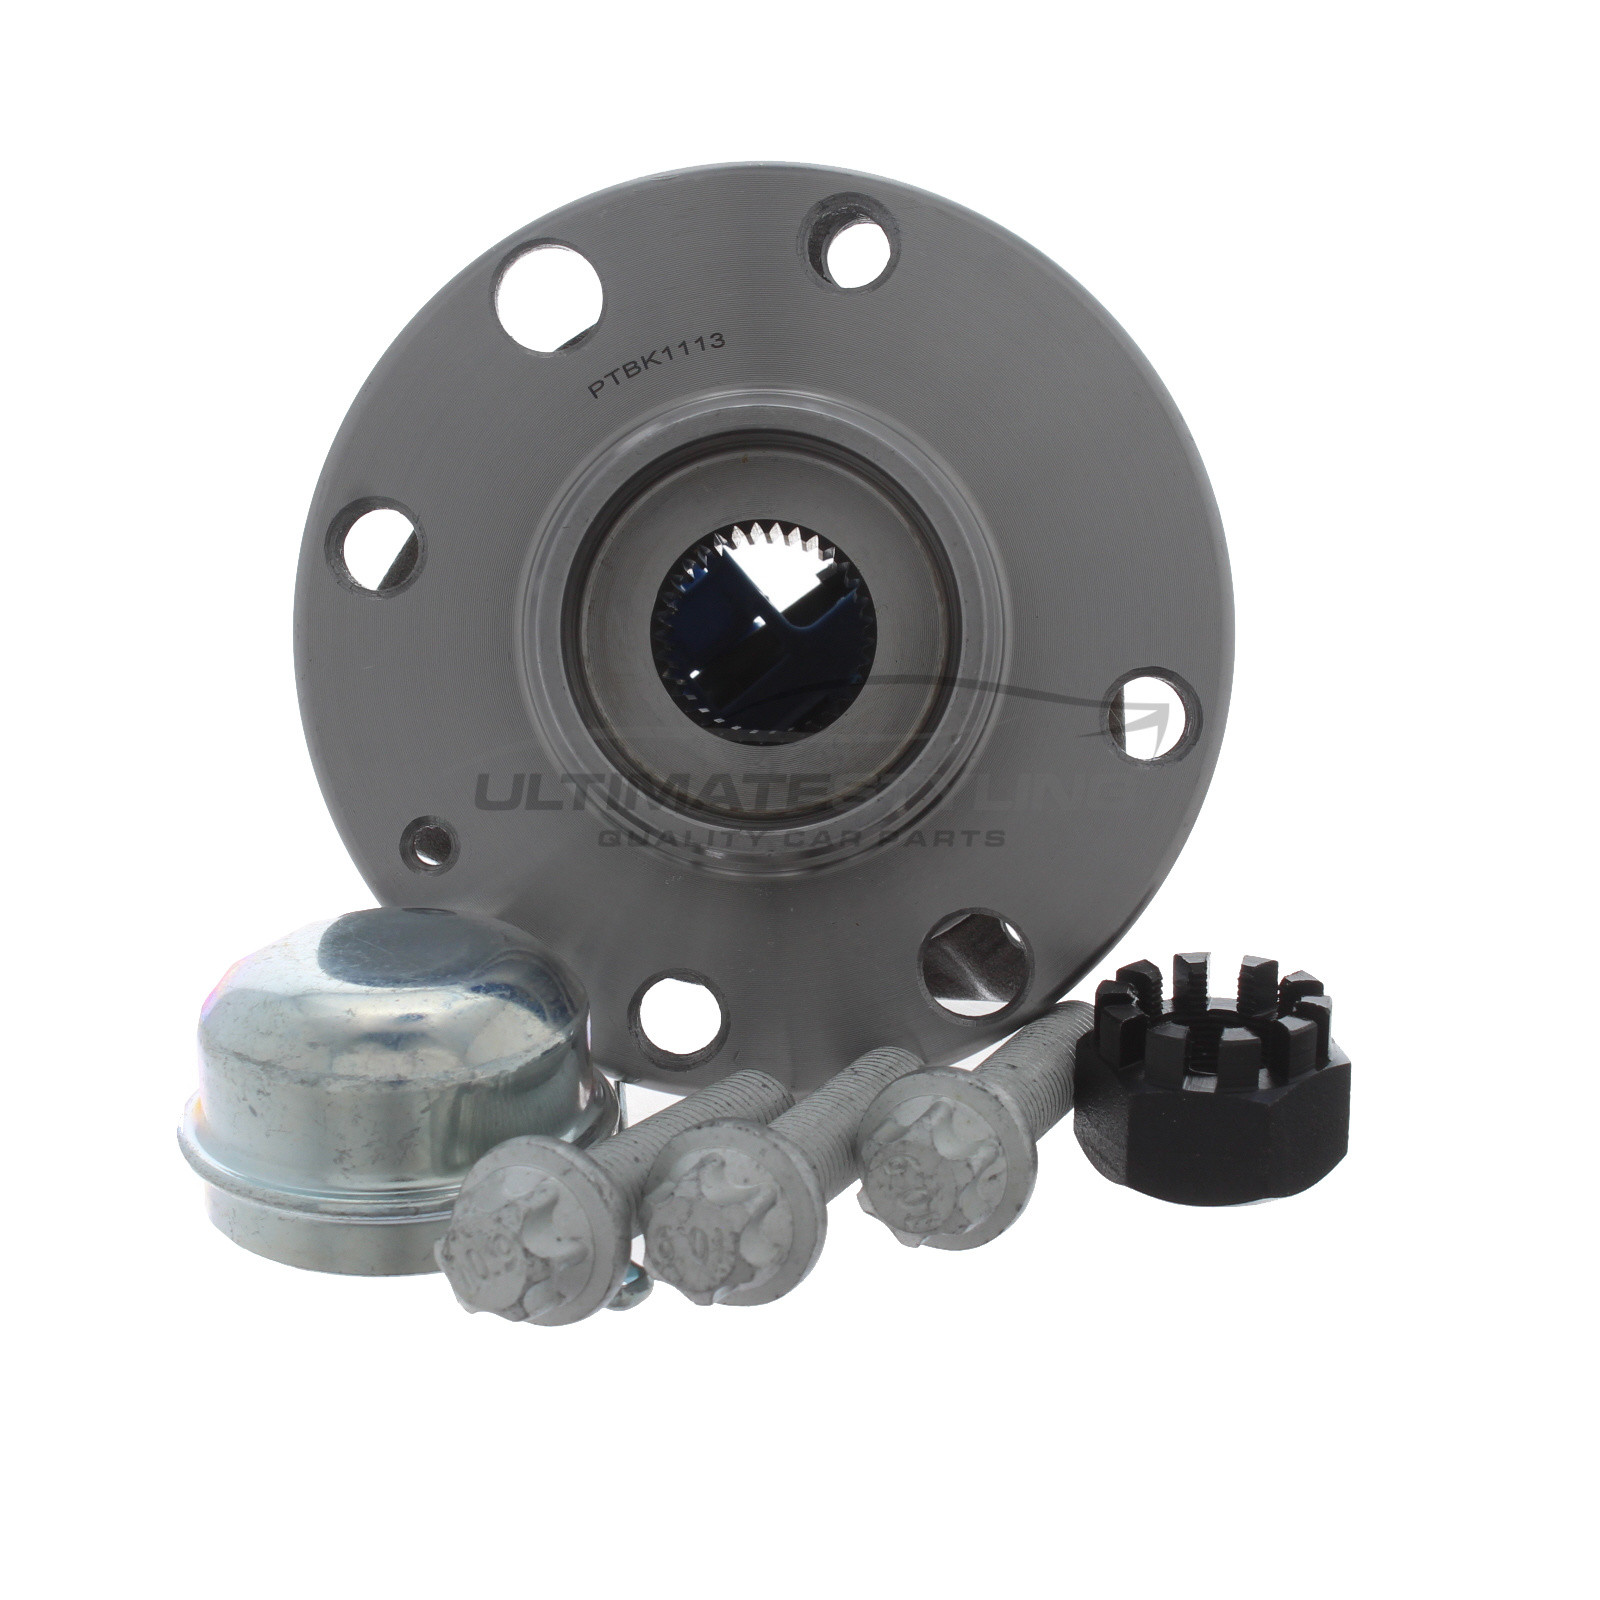 Front <span style="color:red;"><strong>OR</strong></span> Rear Hub Bearing Kit for Lotus Exige